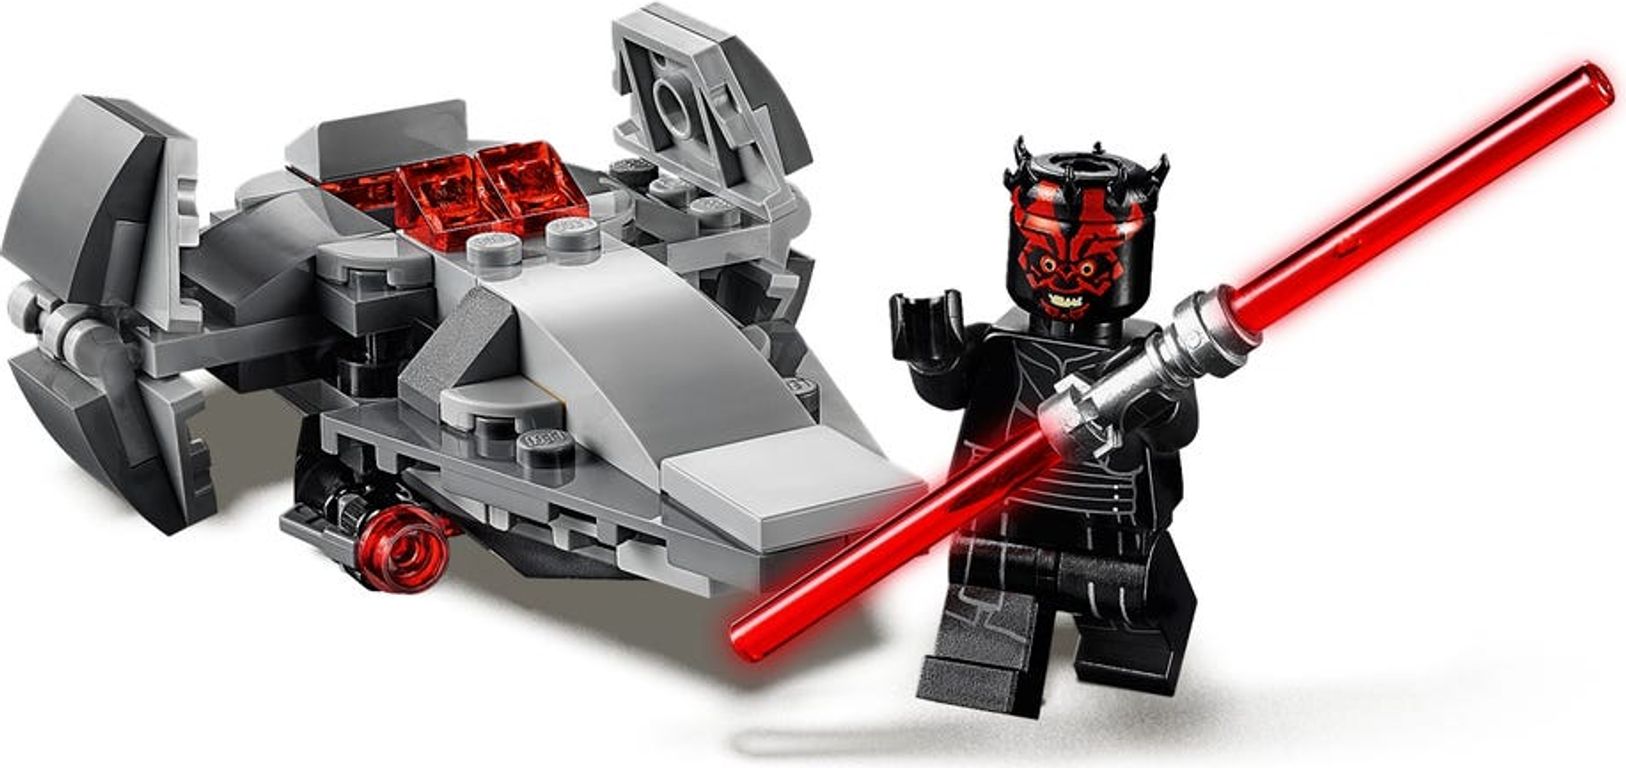 LEGO® Star Wars Sith Infiltrator™ Microfighter minifigures